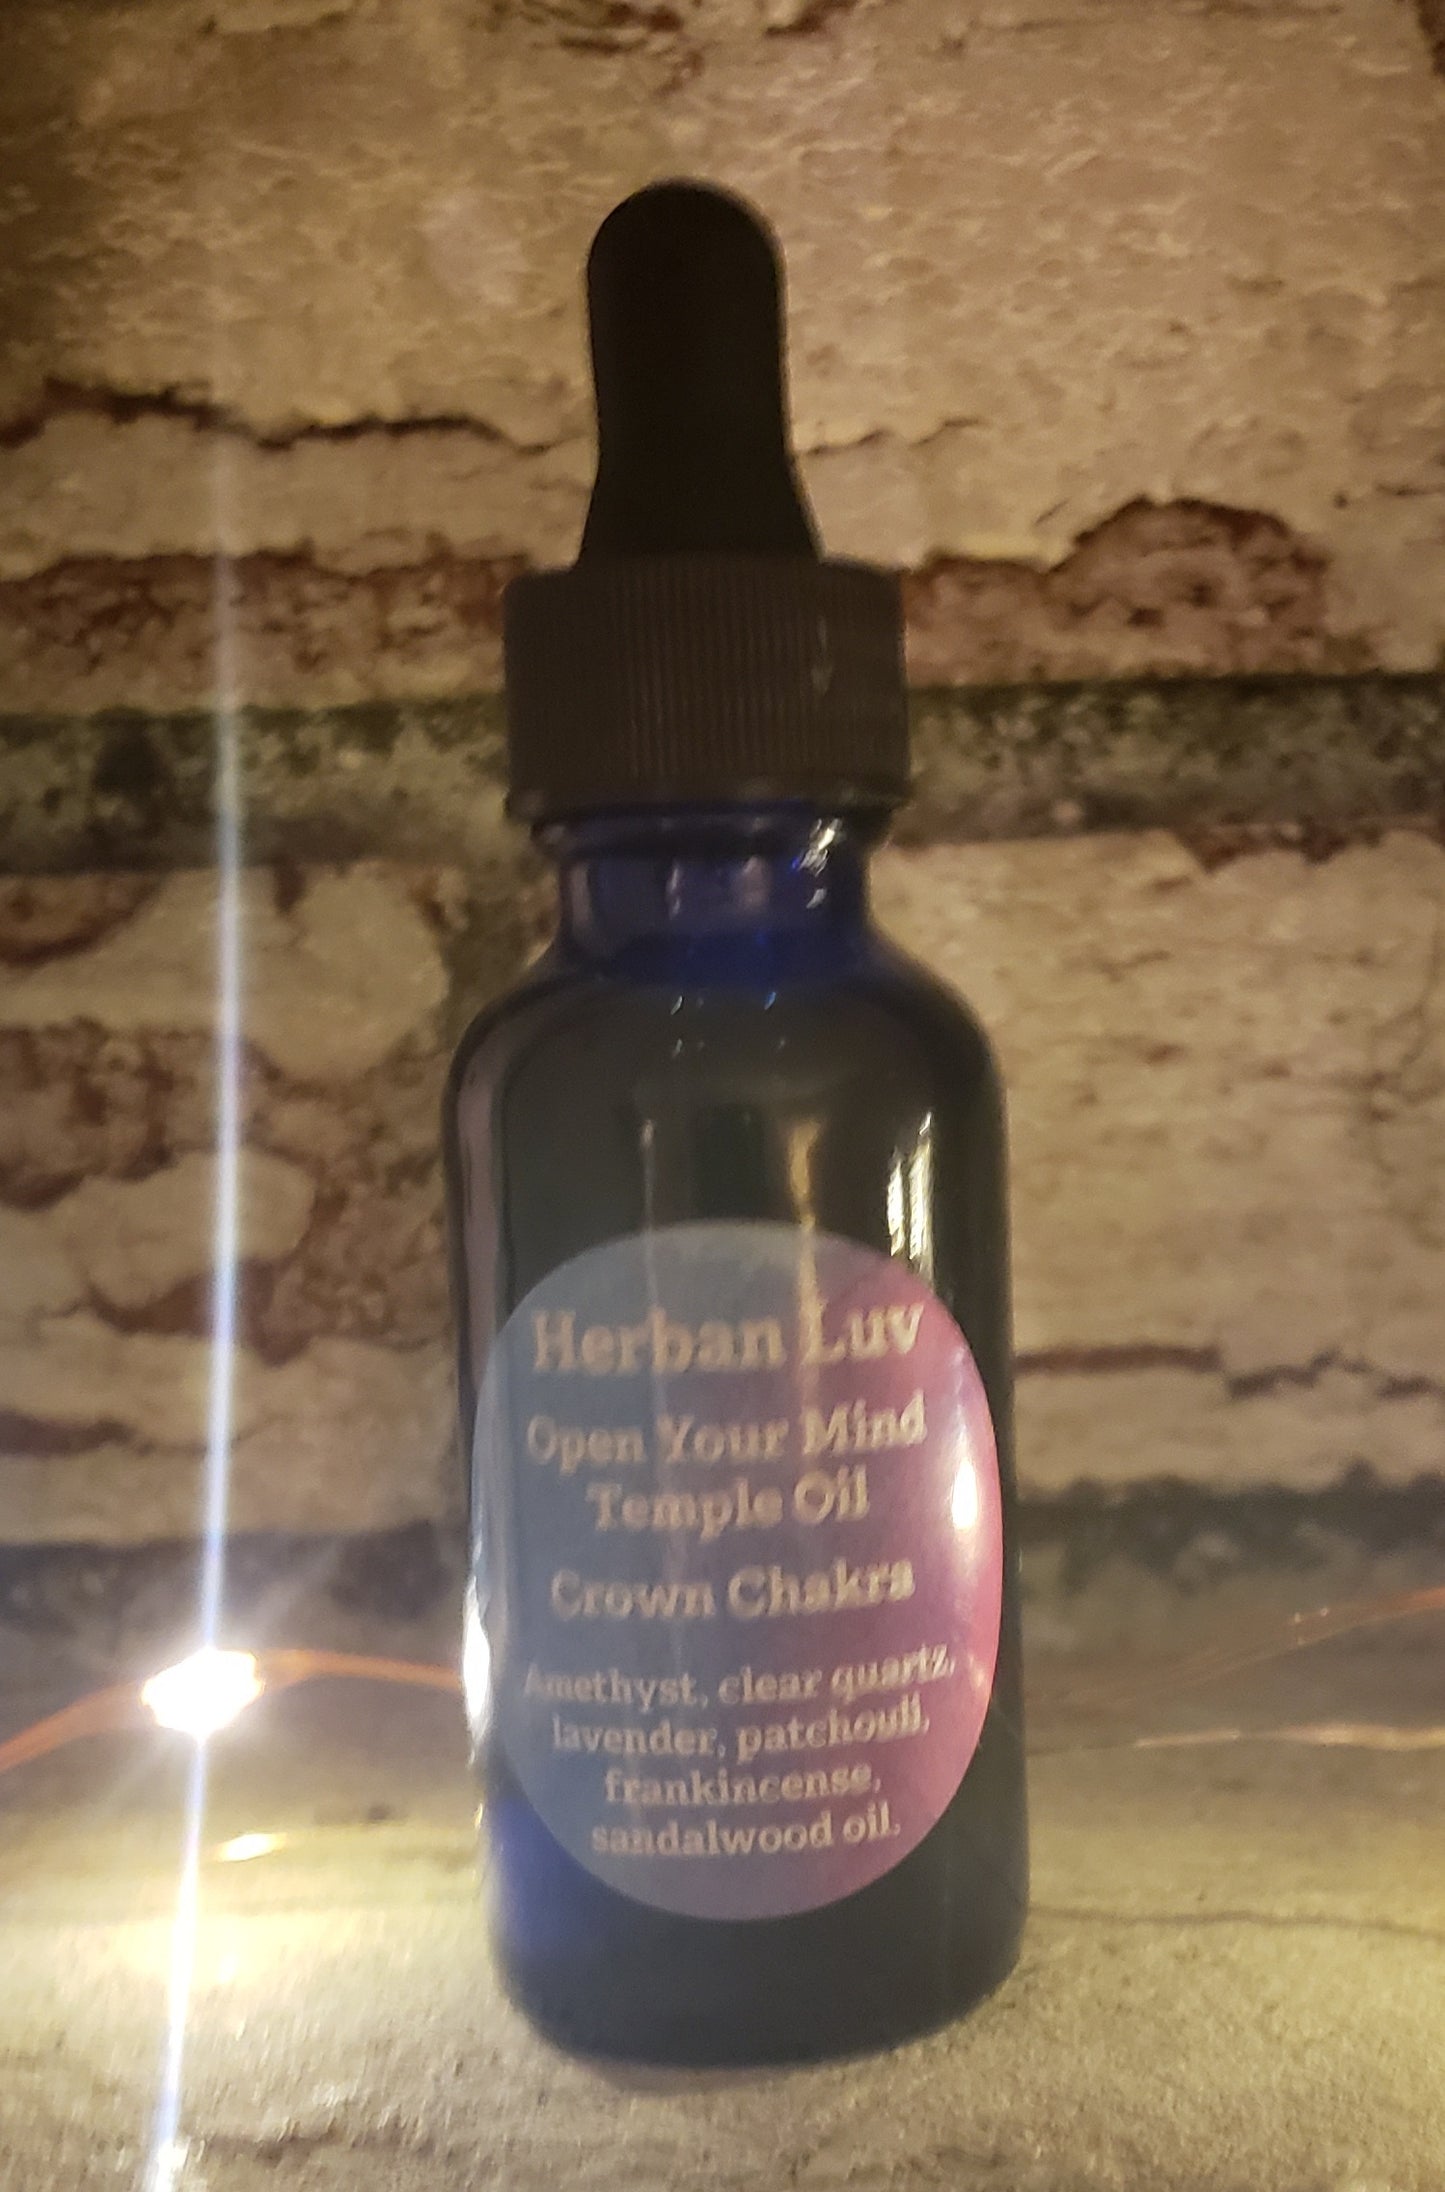 Crystal Infused Open Your Mind "Crown Chakra" Temple Massage Oil